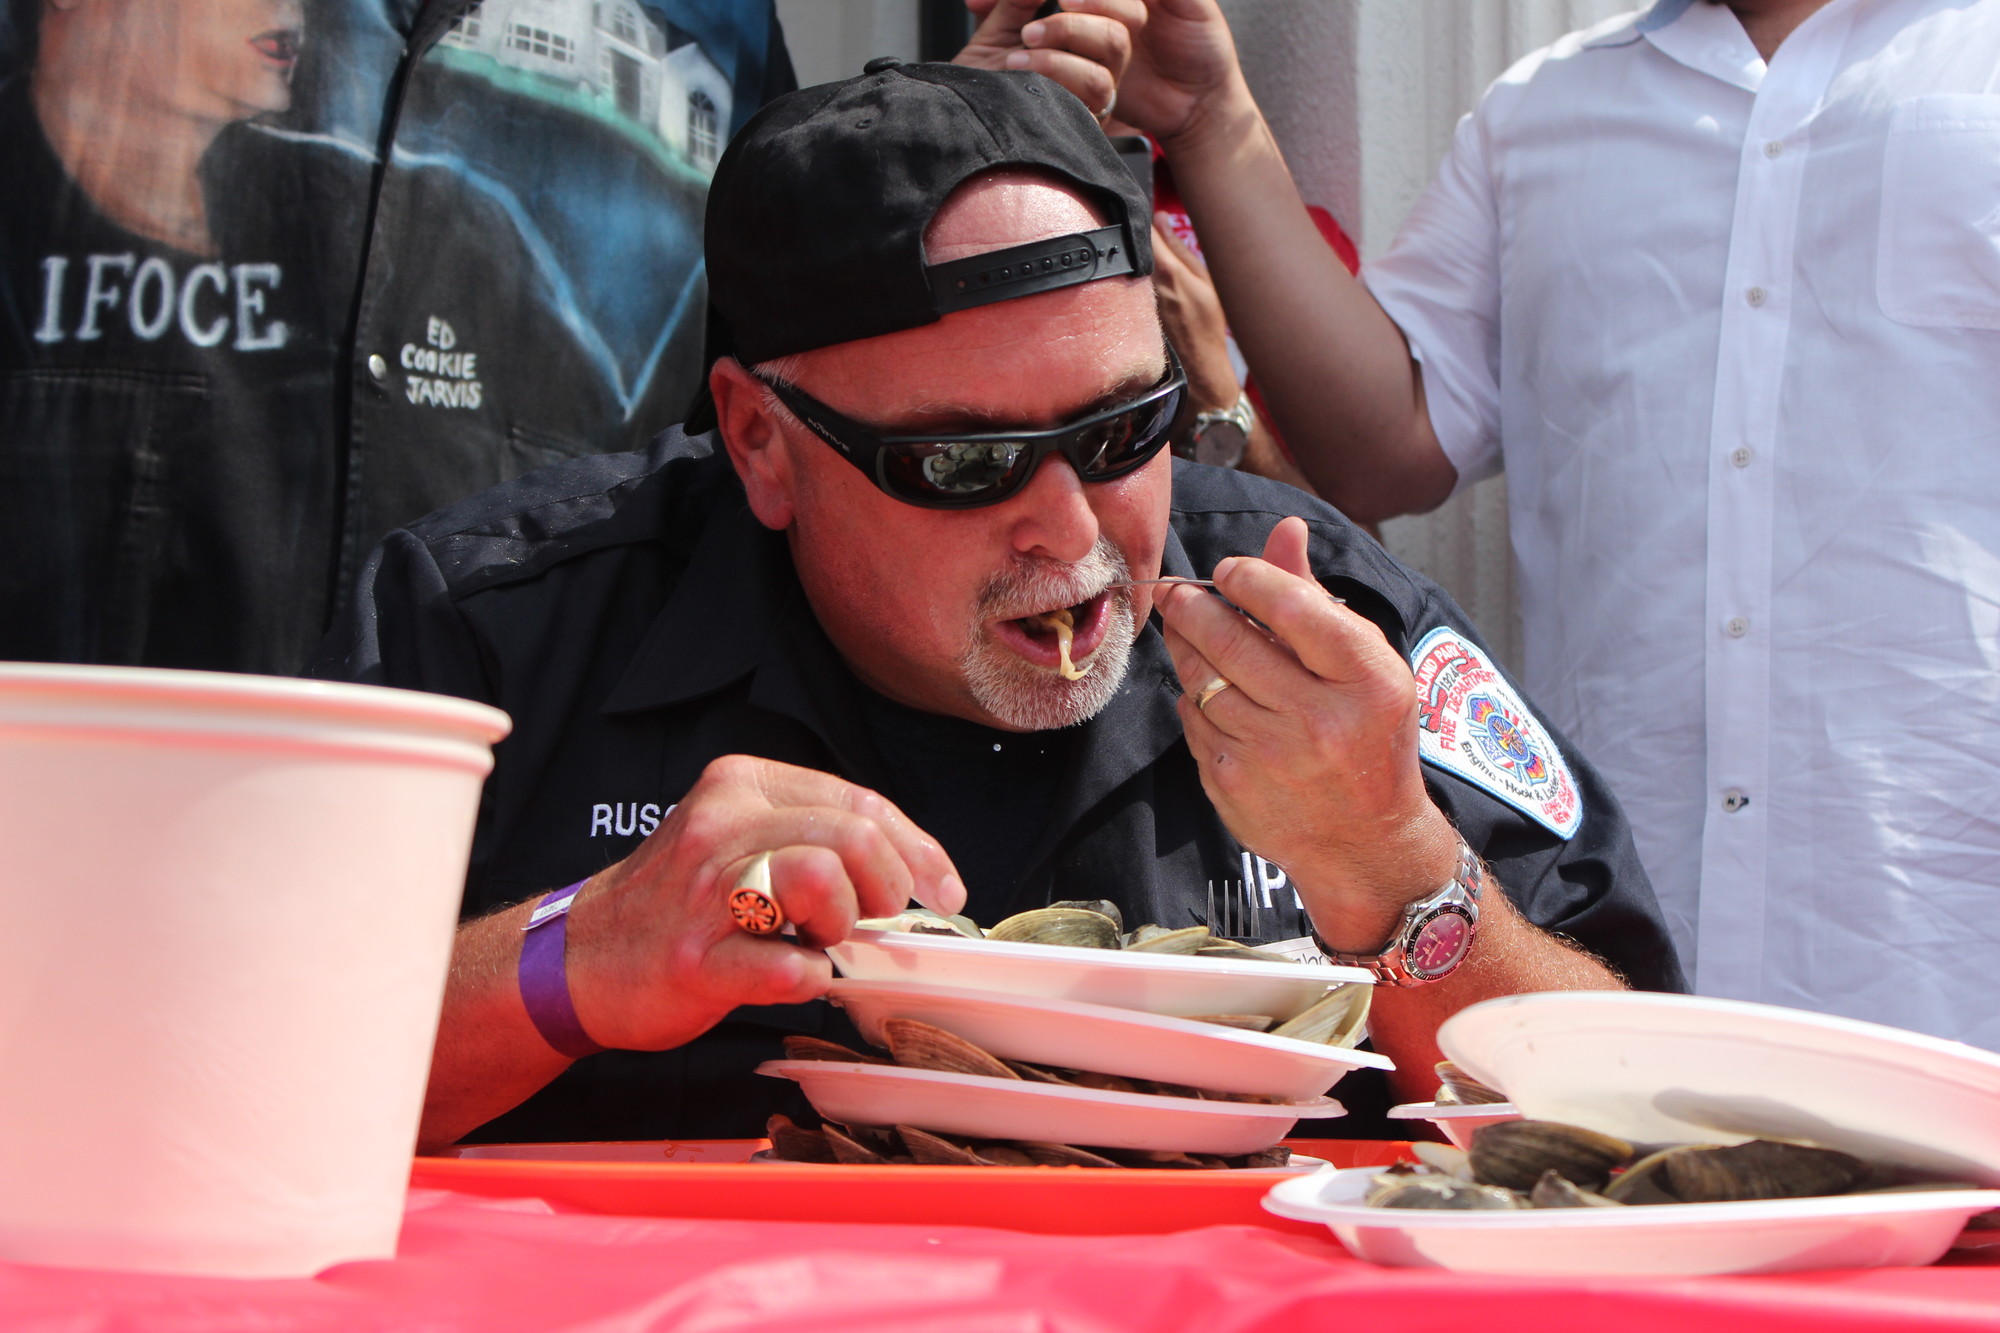 Island Park’s own, former chief Steven Ruscio, made a strong showing at Peter’s Clam Bar’s clam-eating contest on Sunday. Ruscio won the round but did not place in the final.